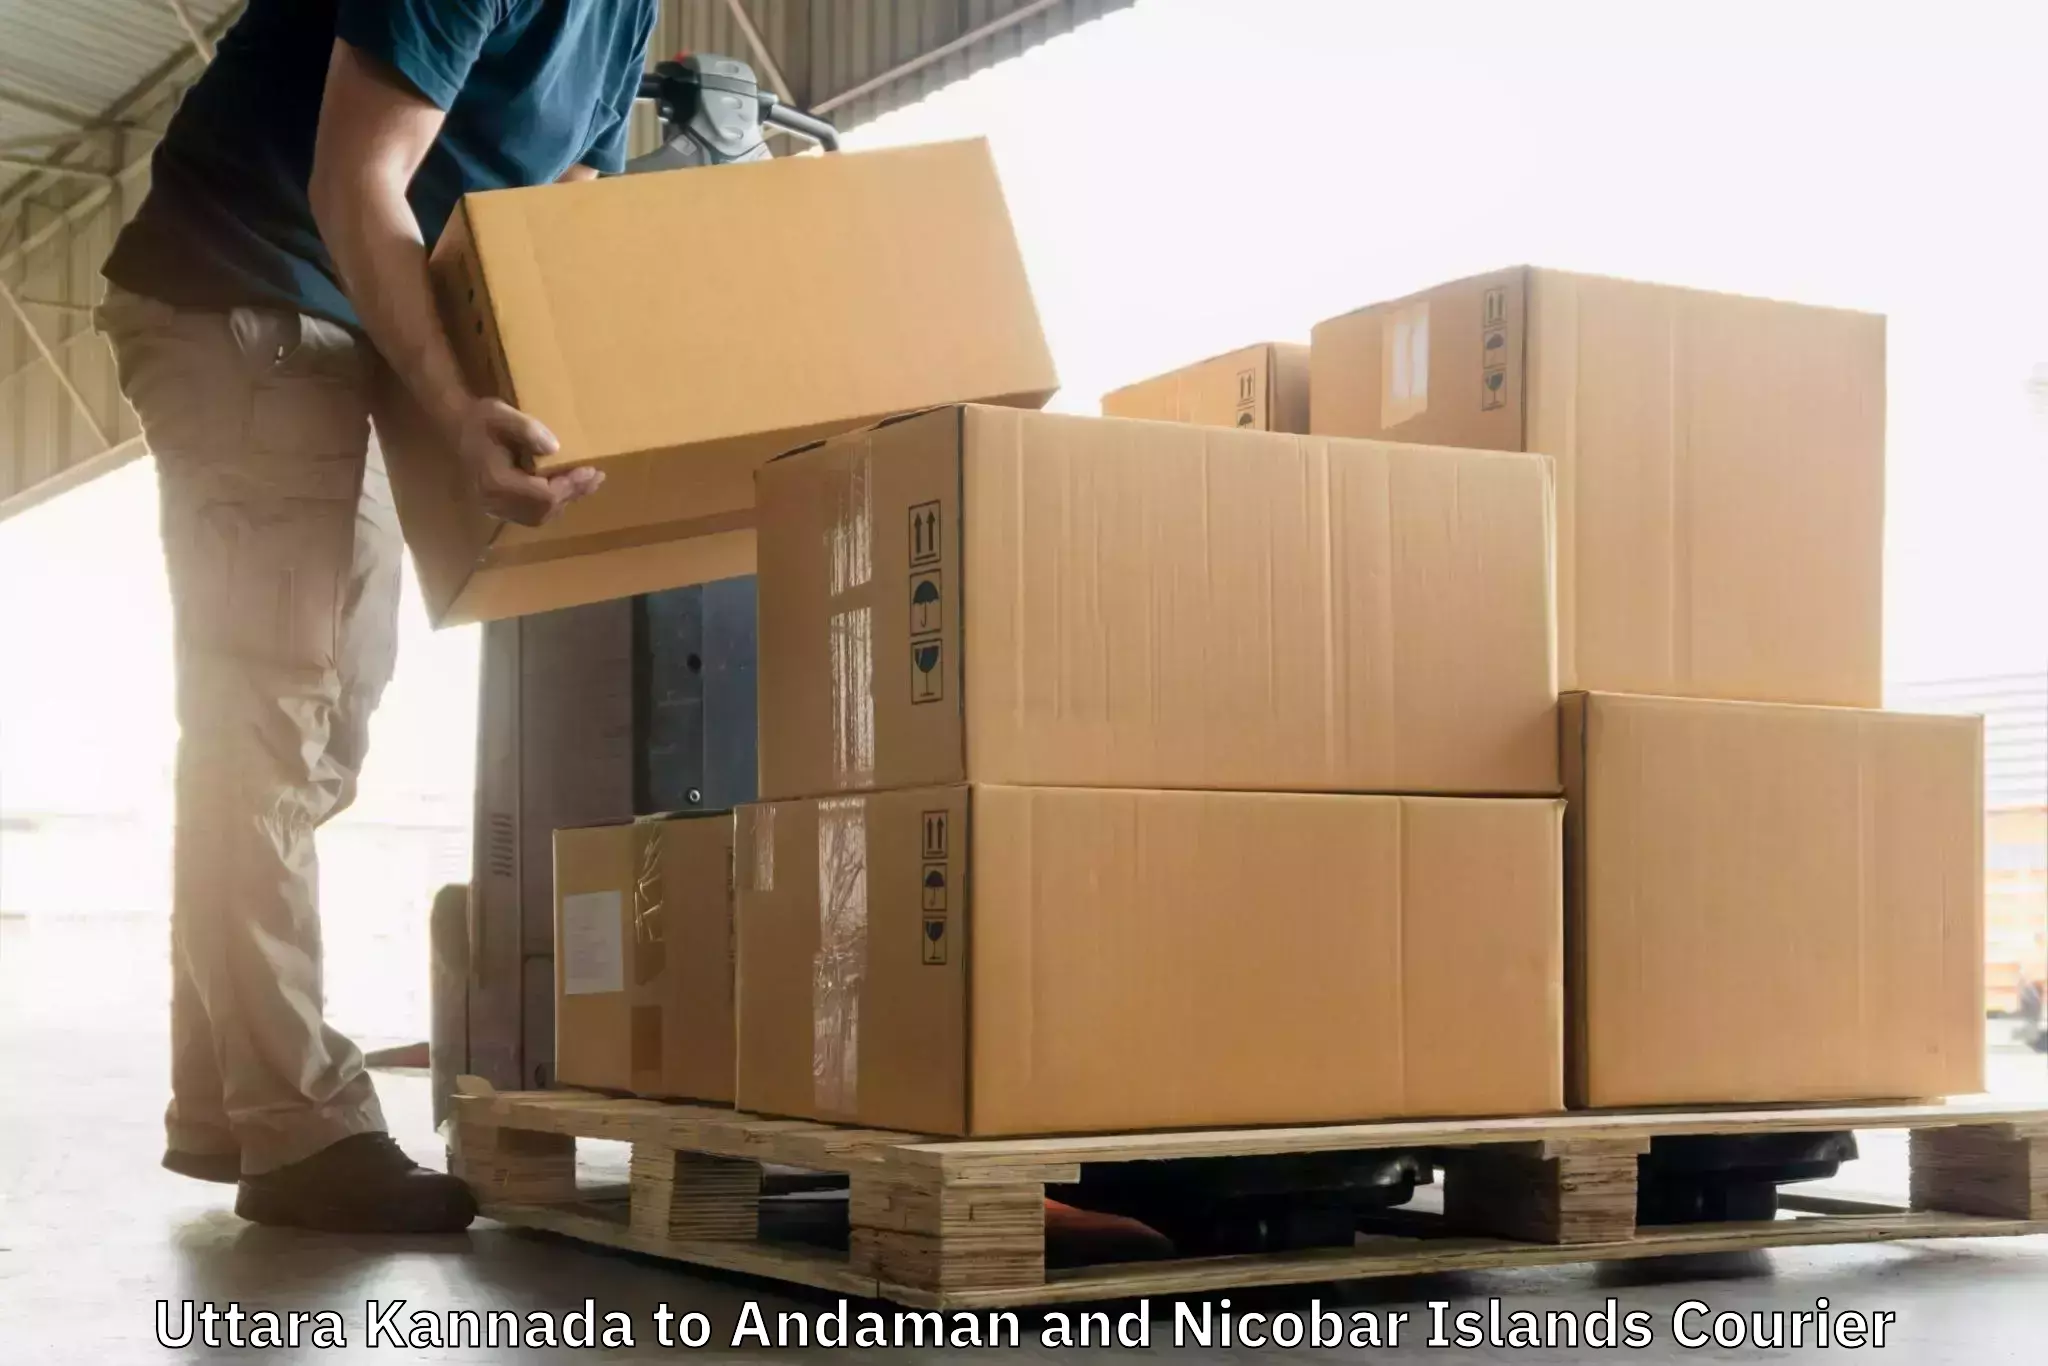 Package delivery network Uttara Kannada to Andaman and Nicobar Islands